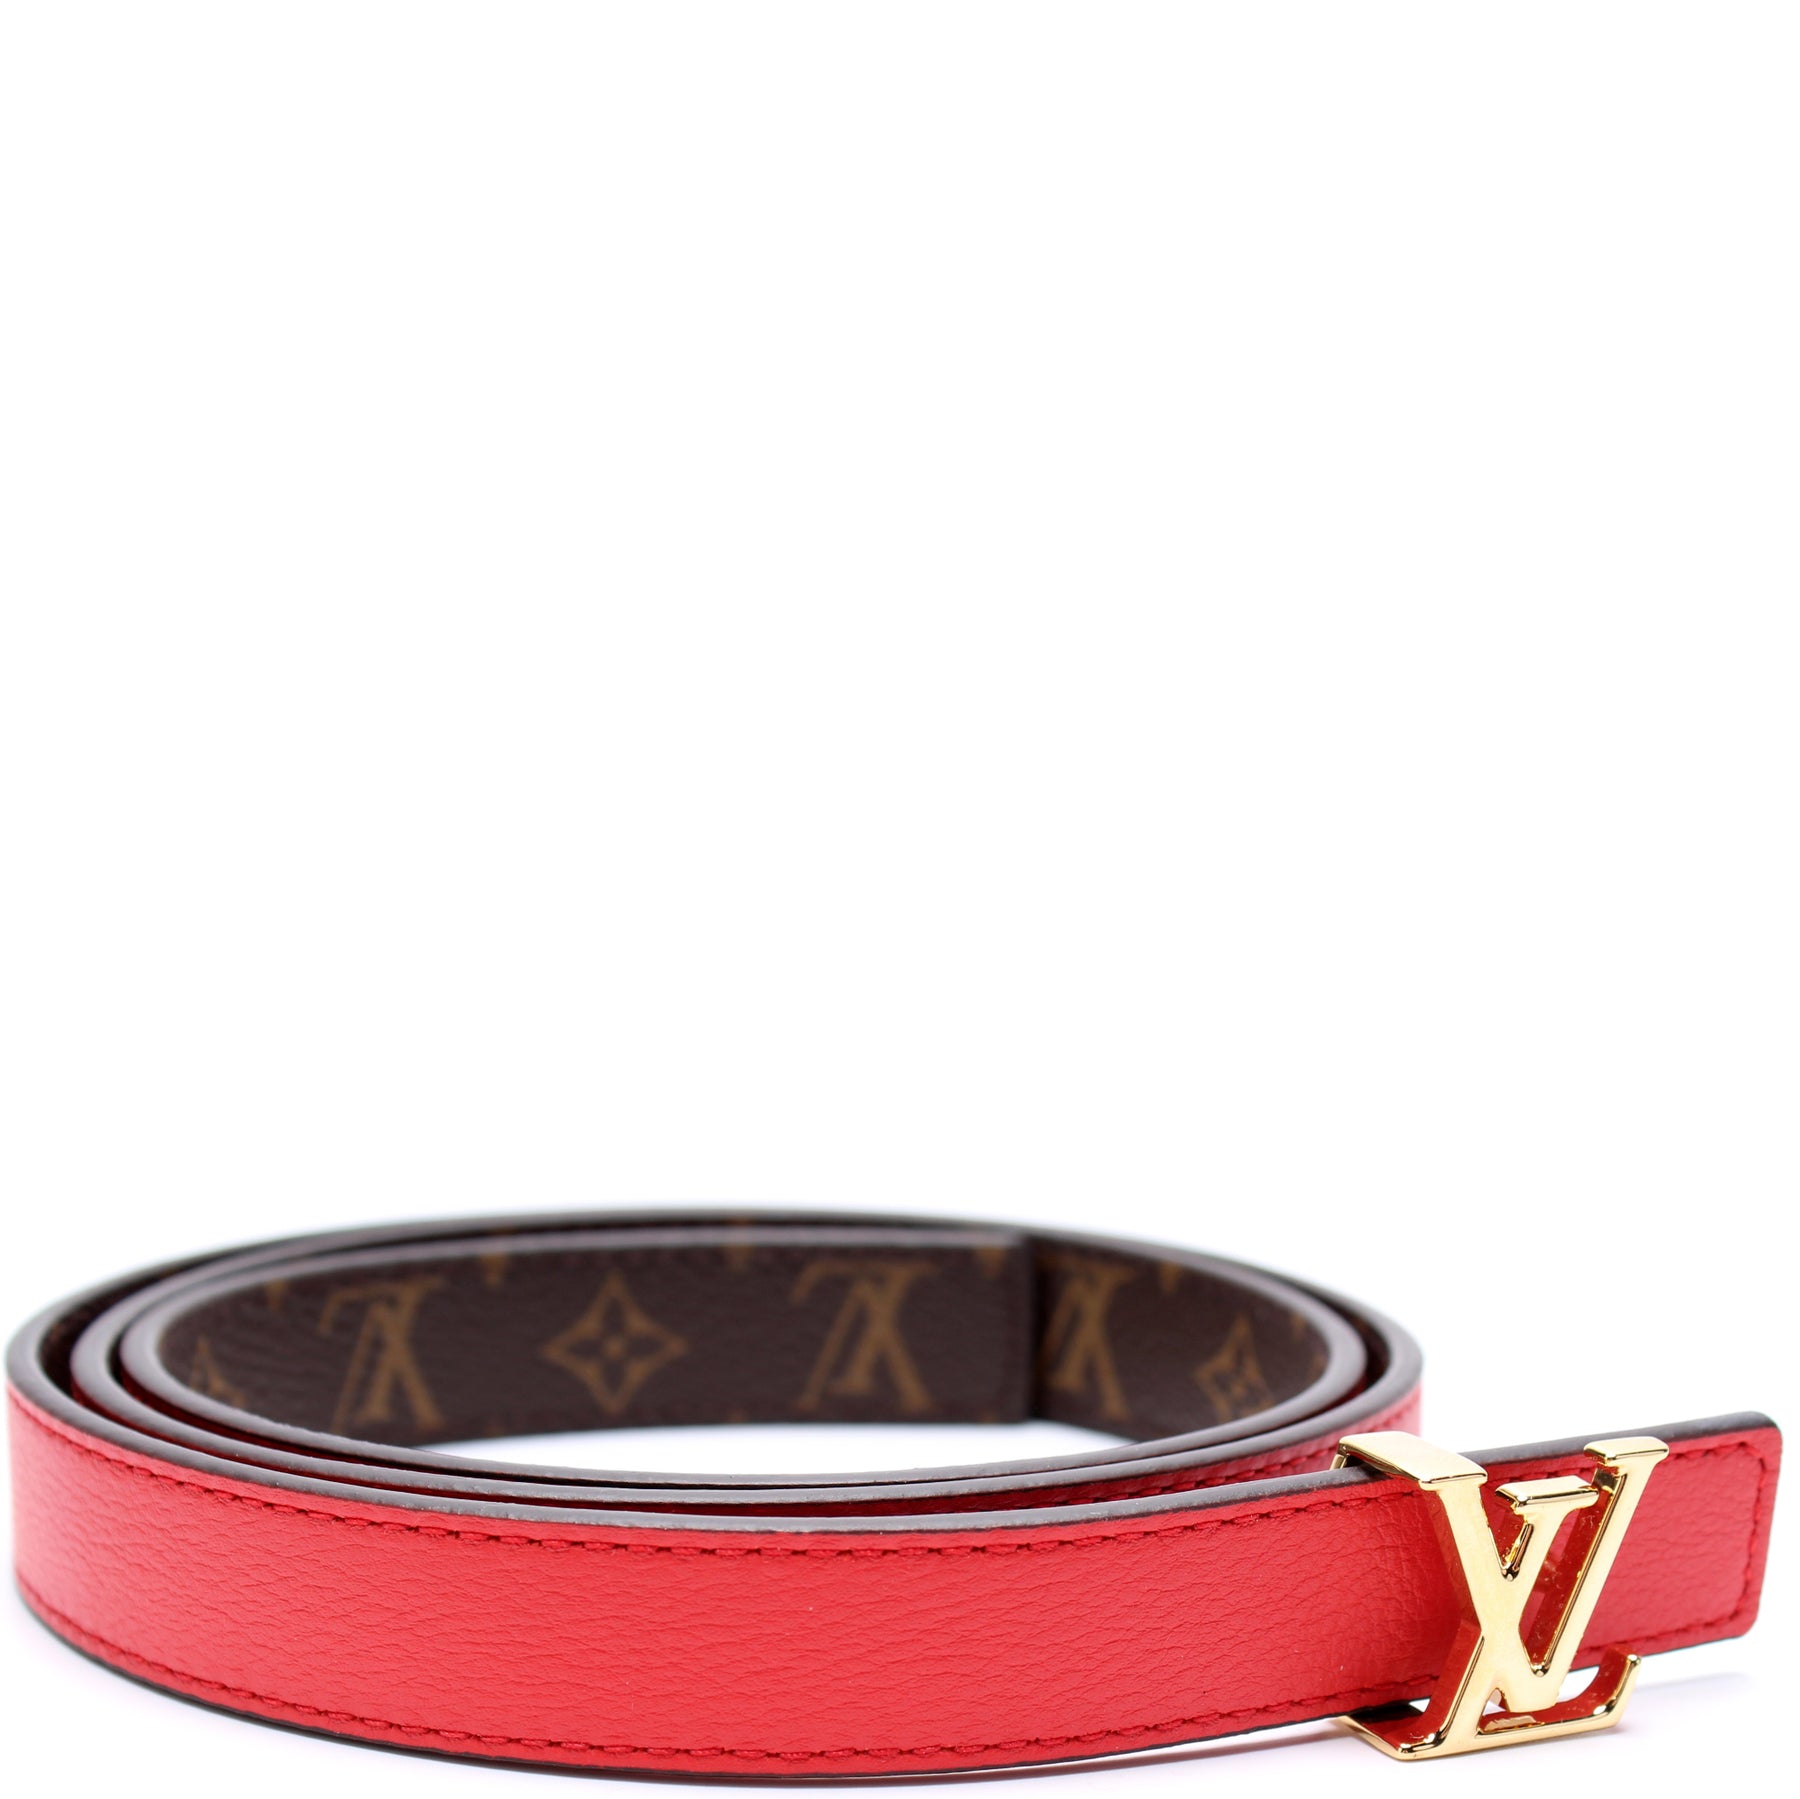 Louis Vuitton 20mm Red Leather Strap